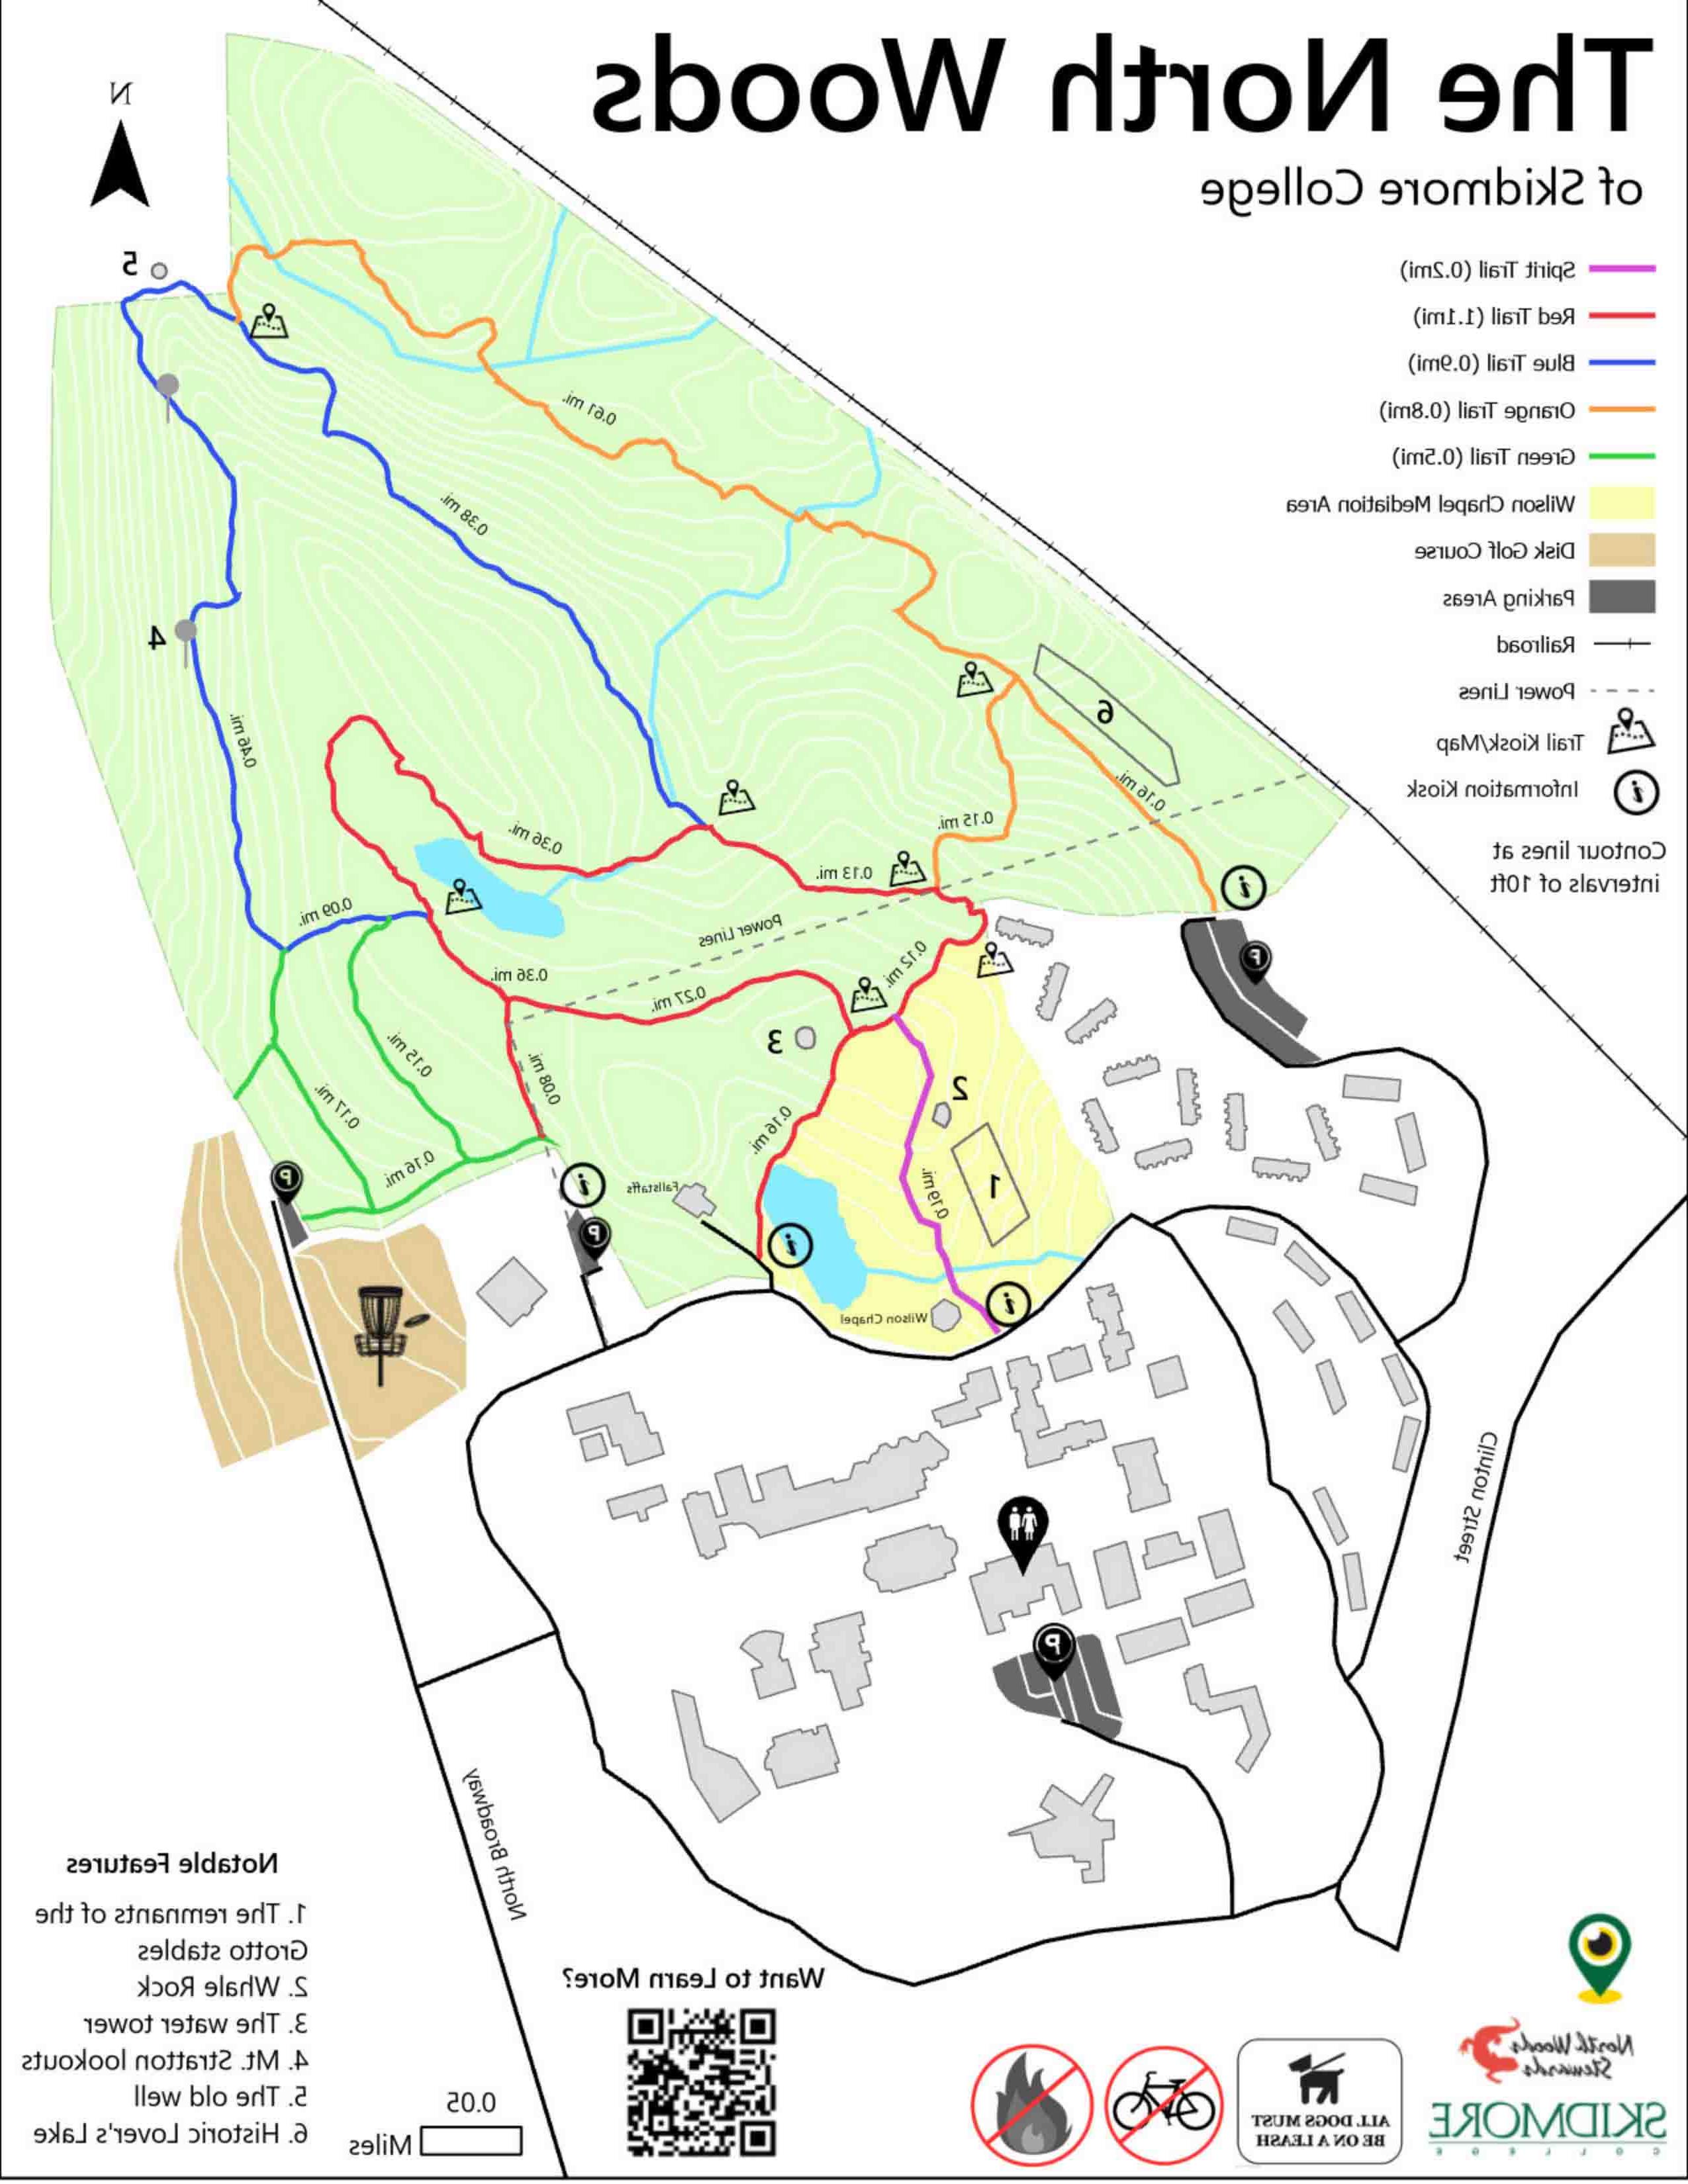 Image includes land area in green highligh, frisbee golf in light yelllow. The 3 miles of trail include a purple section, green, blue, orange, and red sections.